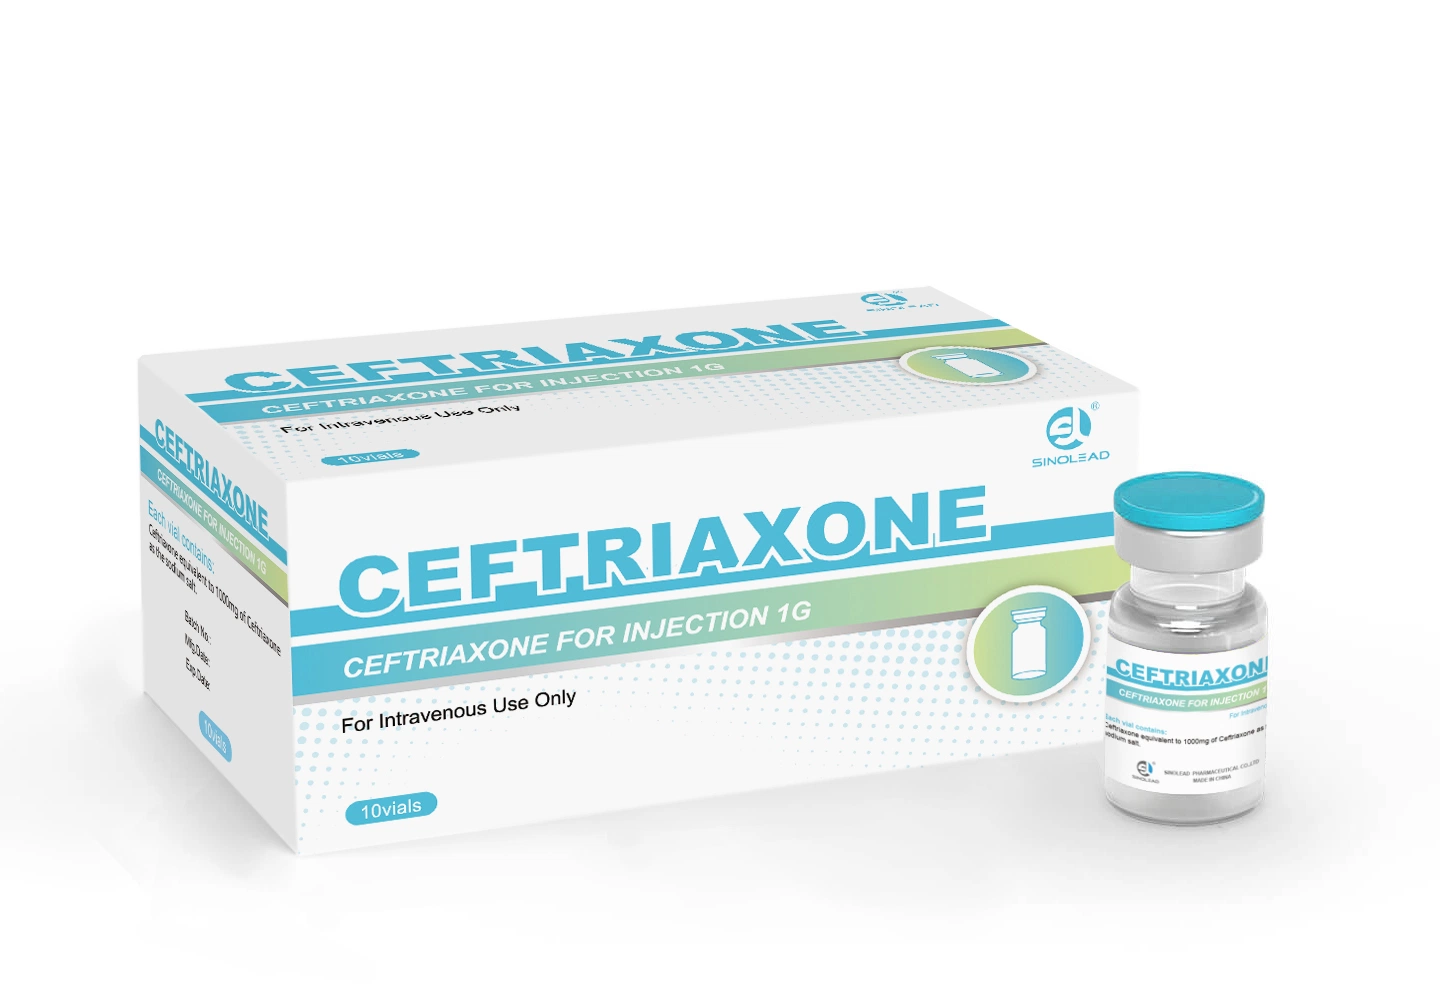 Ceftriaxone for Injection 1g. 10vials/Box